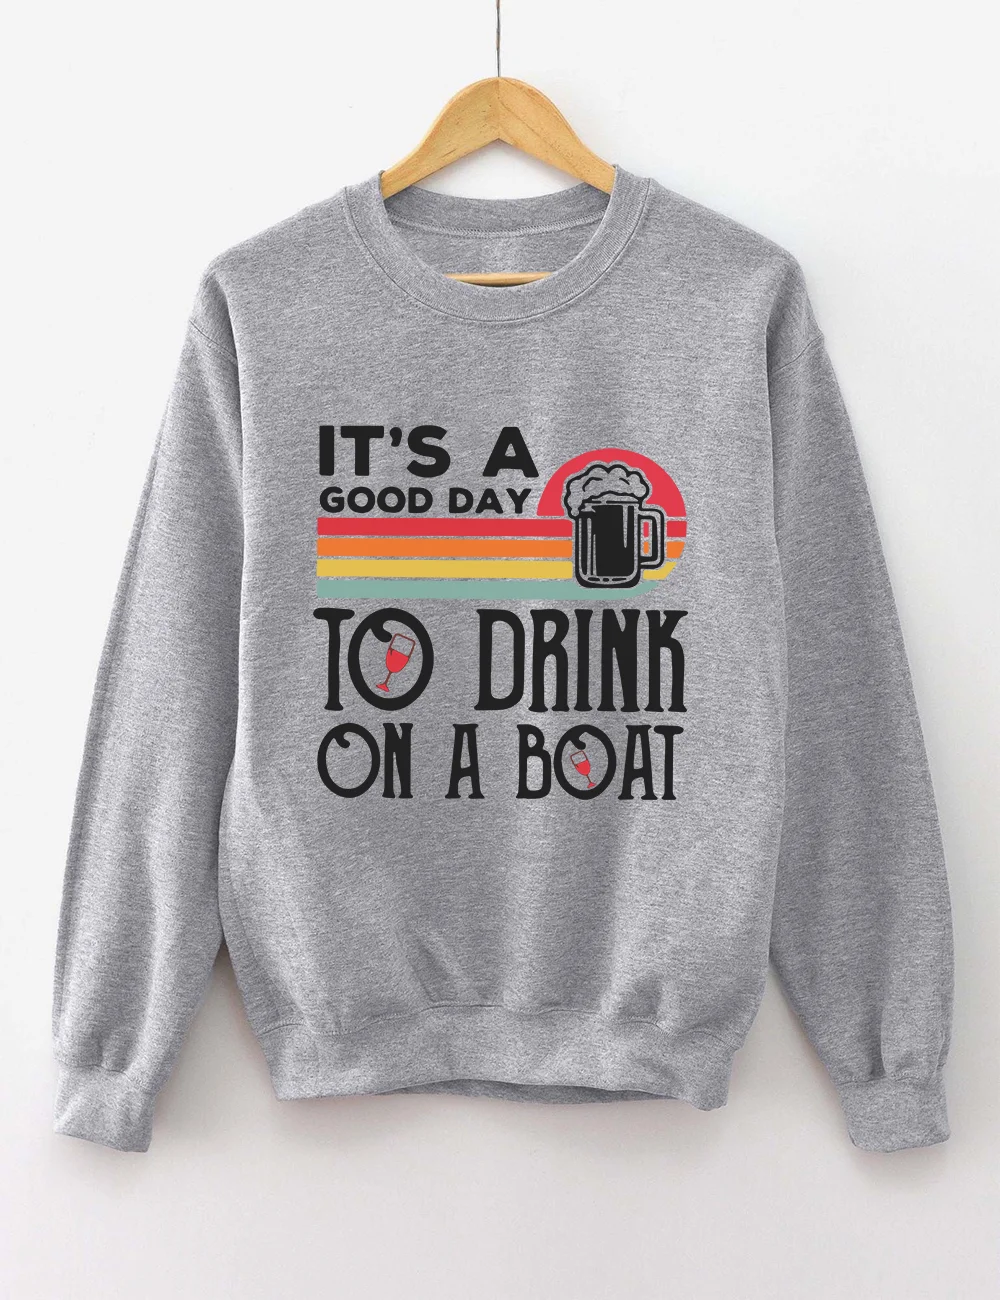 It's A Good Day To Drink On A Boat Sweatshirt